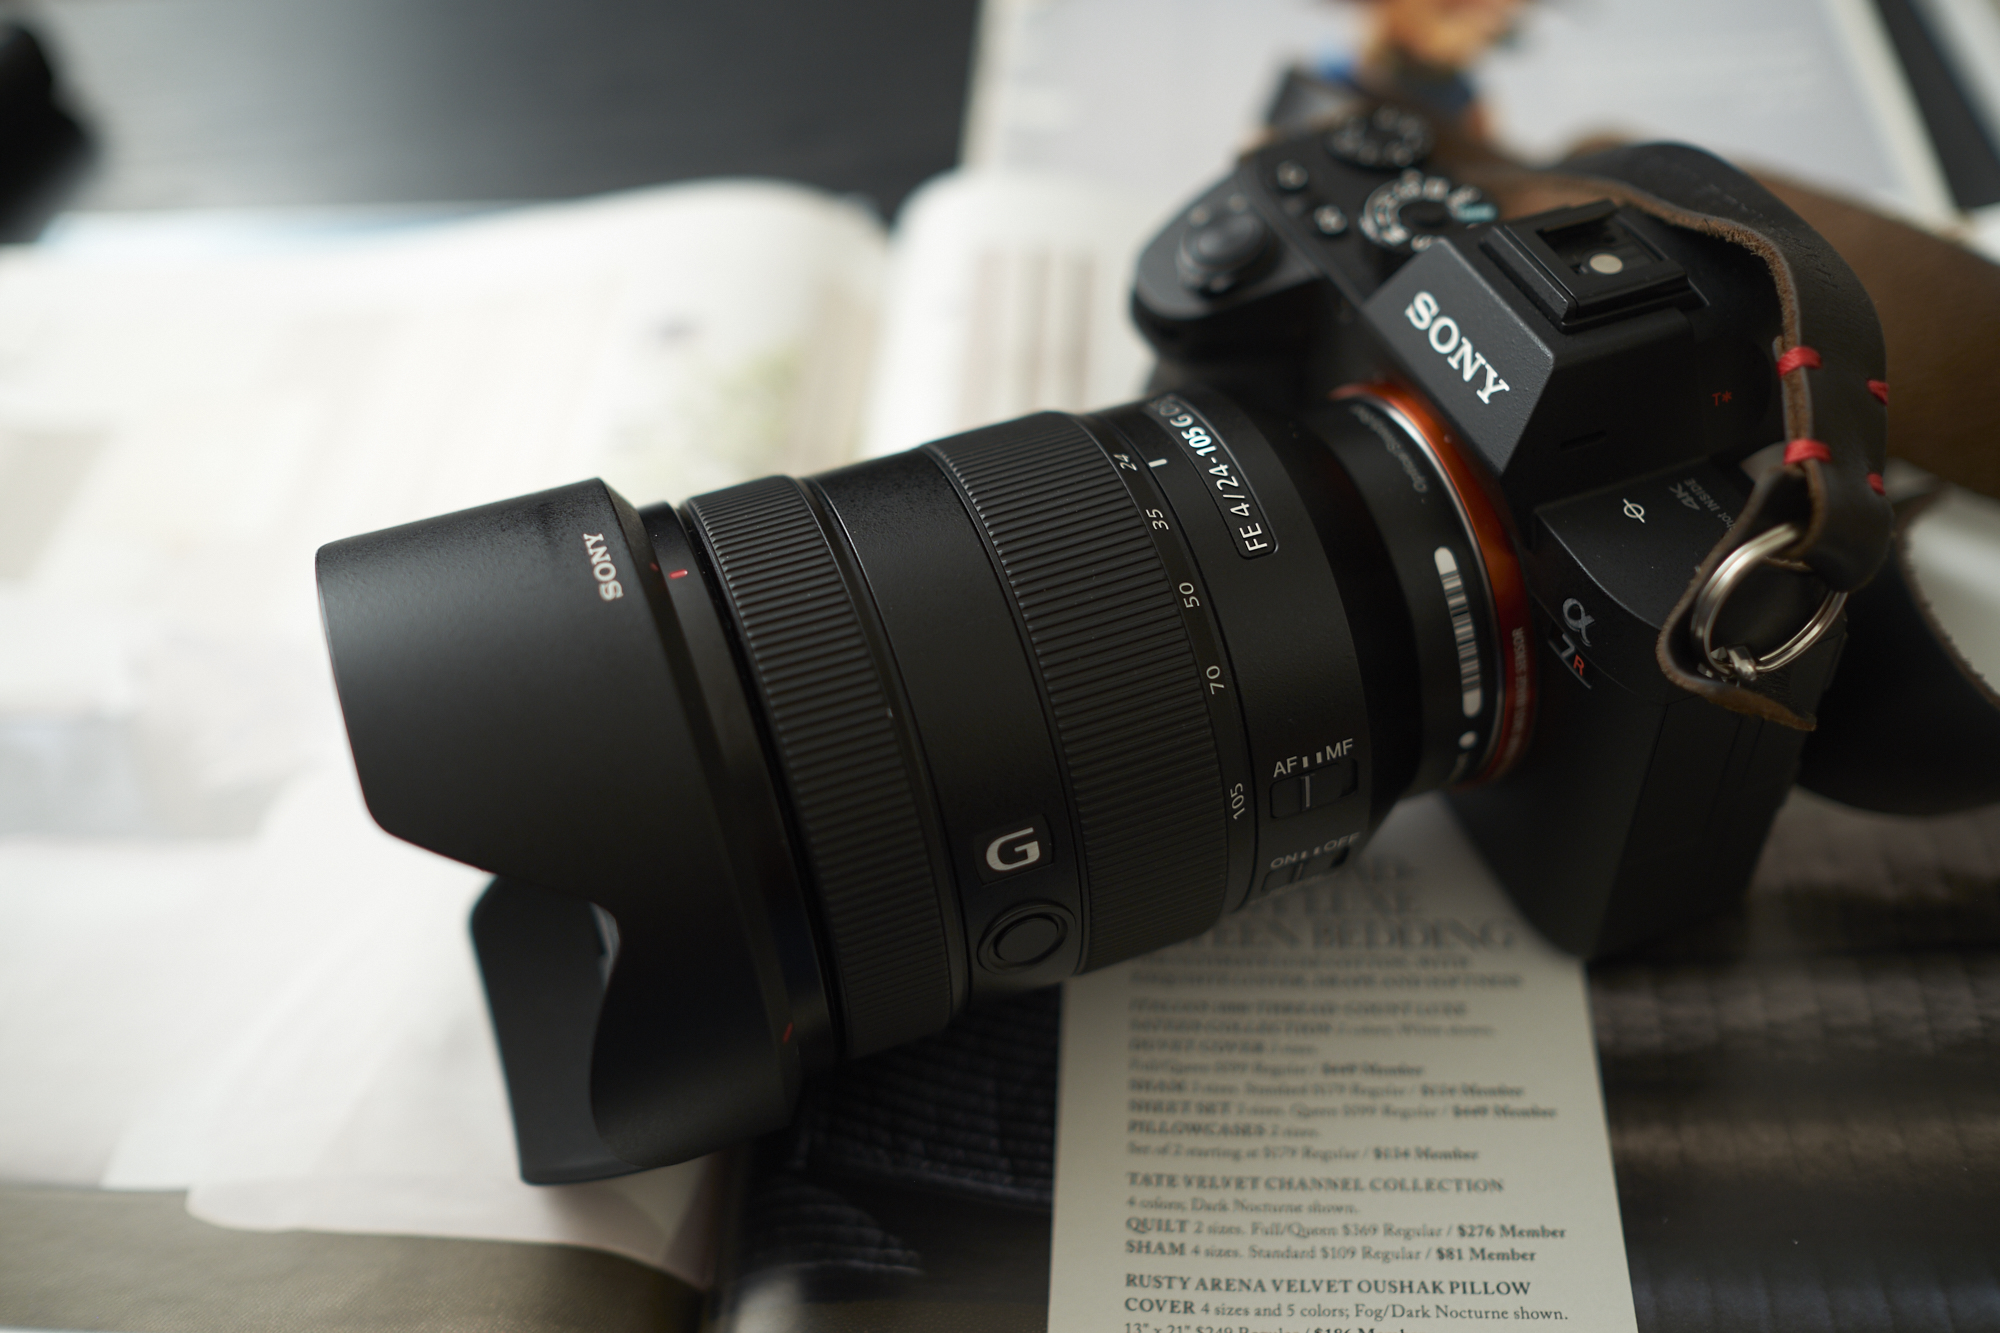 Chris Gampat The Phoblographer Sony 24-105mm f4 OSS G review product images 3